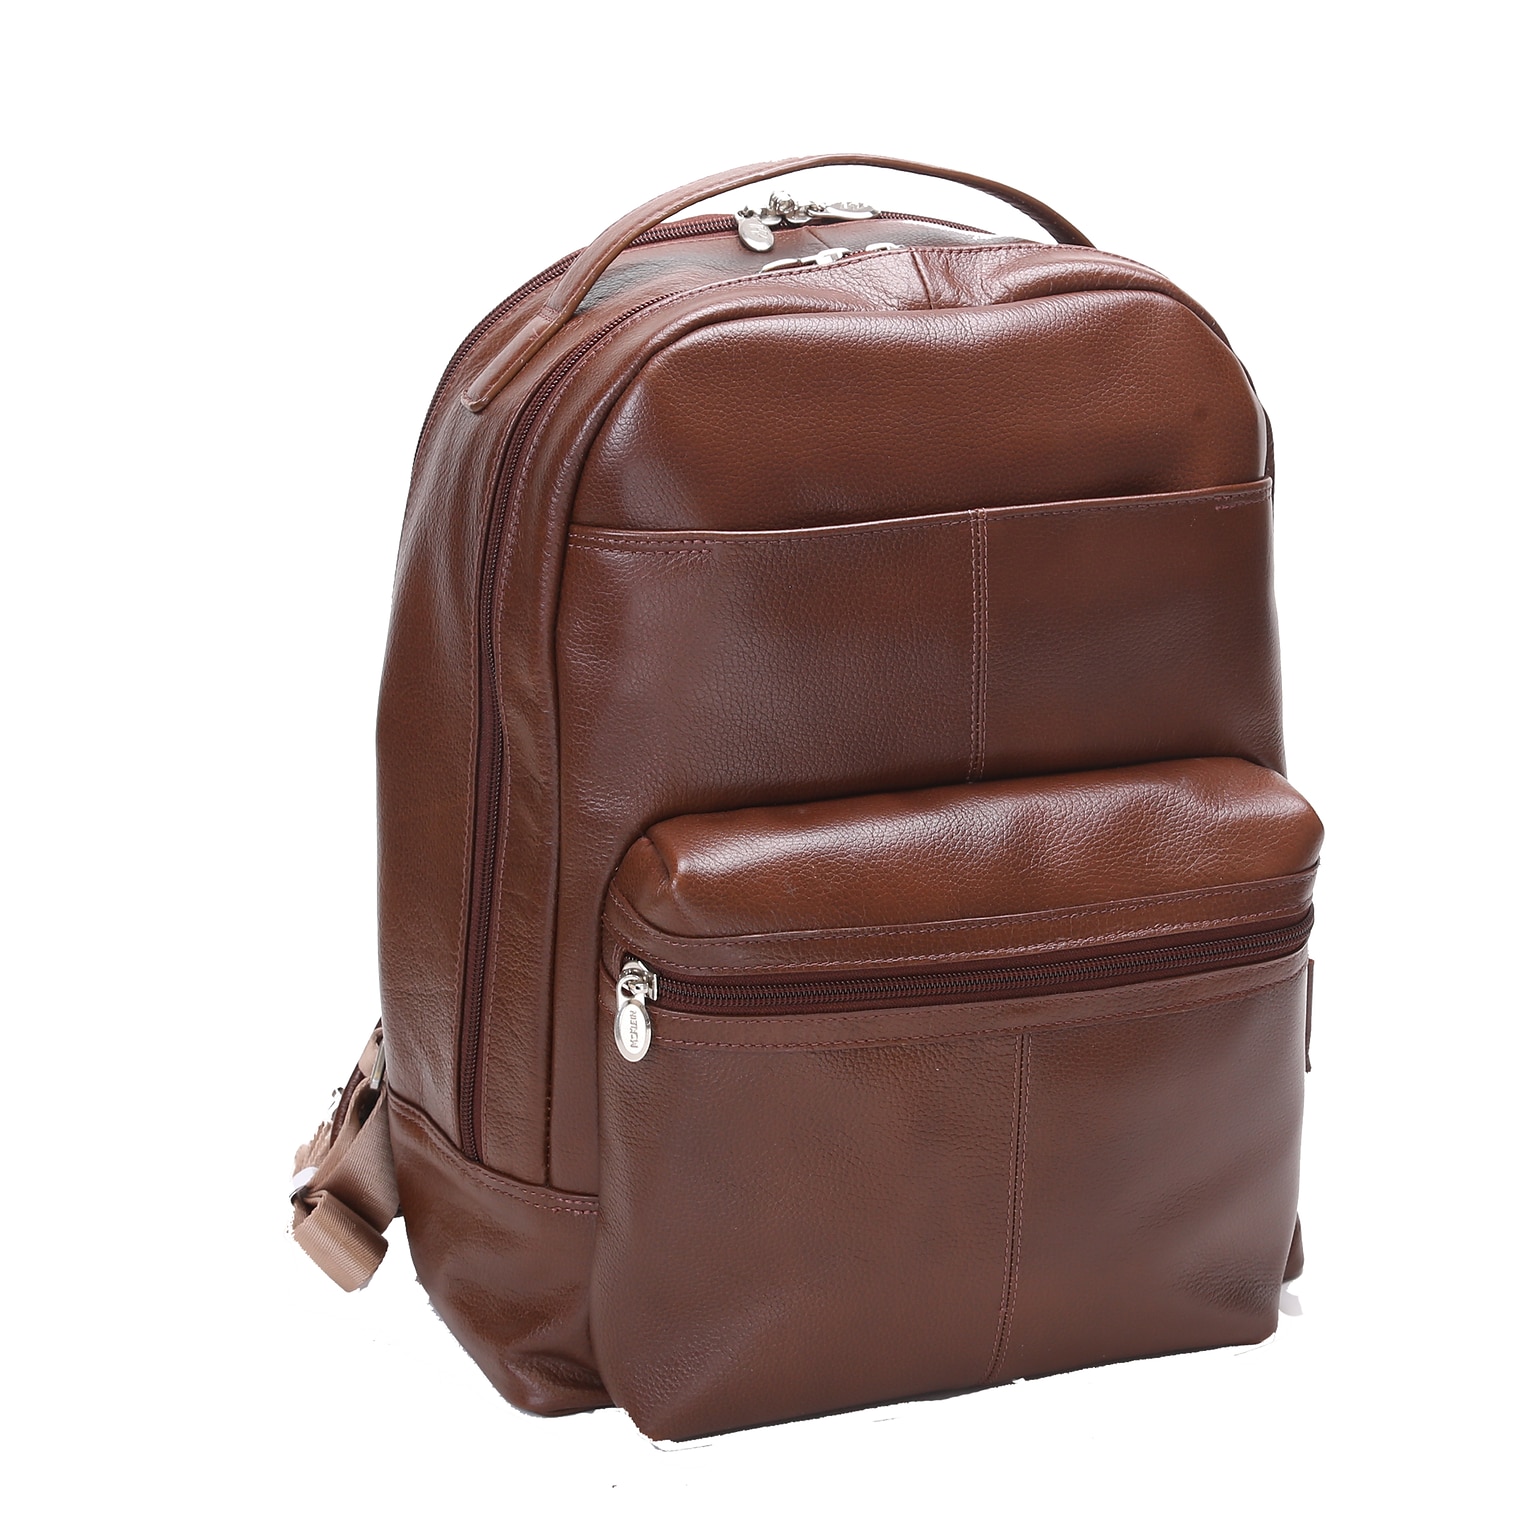 Mcklein Leather Dual Compartment Laptop Backpack, Parker, Pebble Grain Calfskin Leather, Brown (88554)